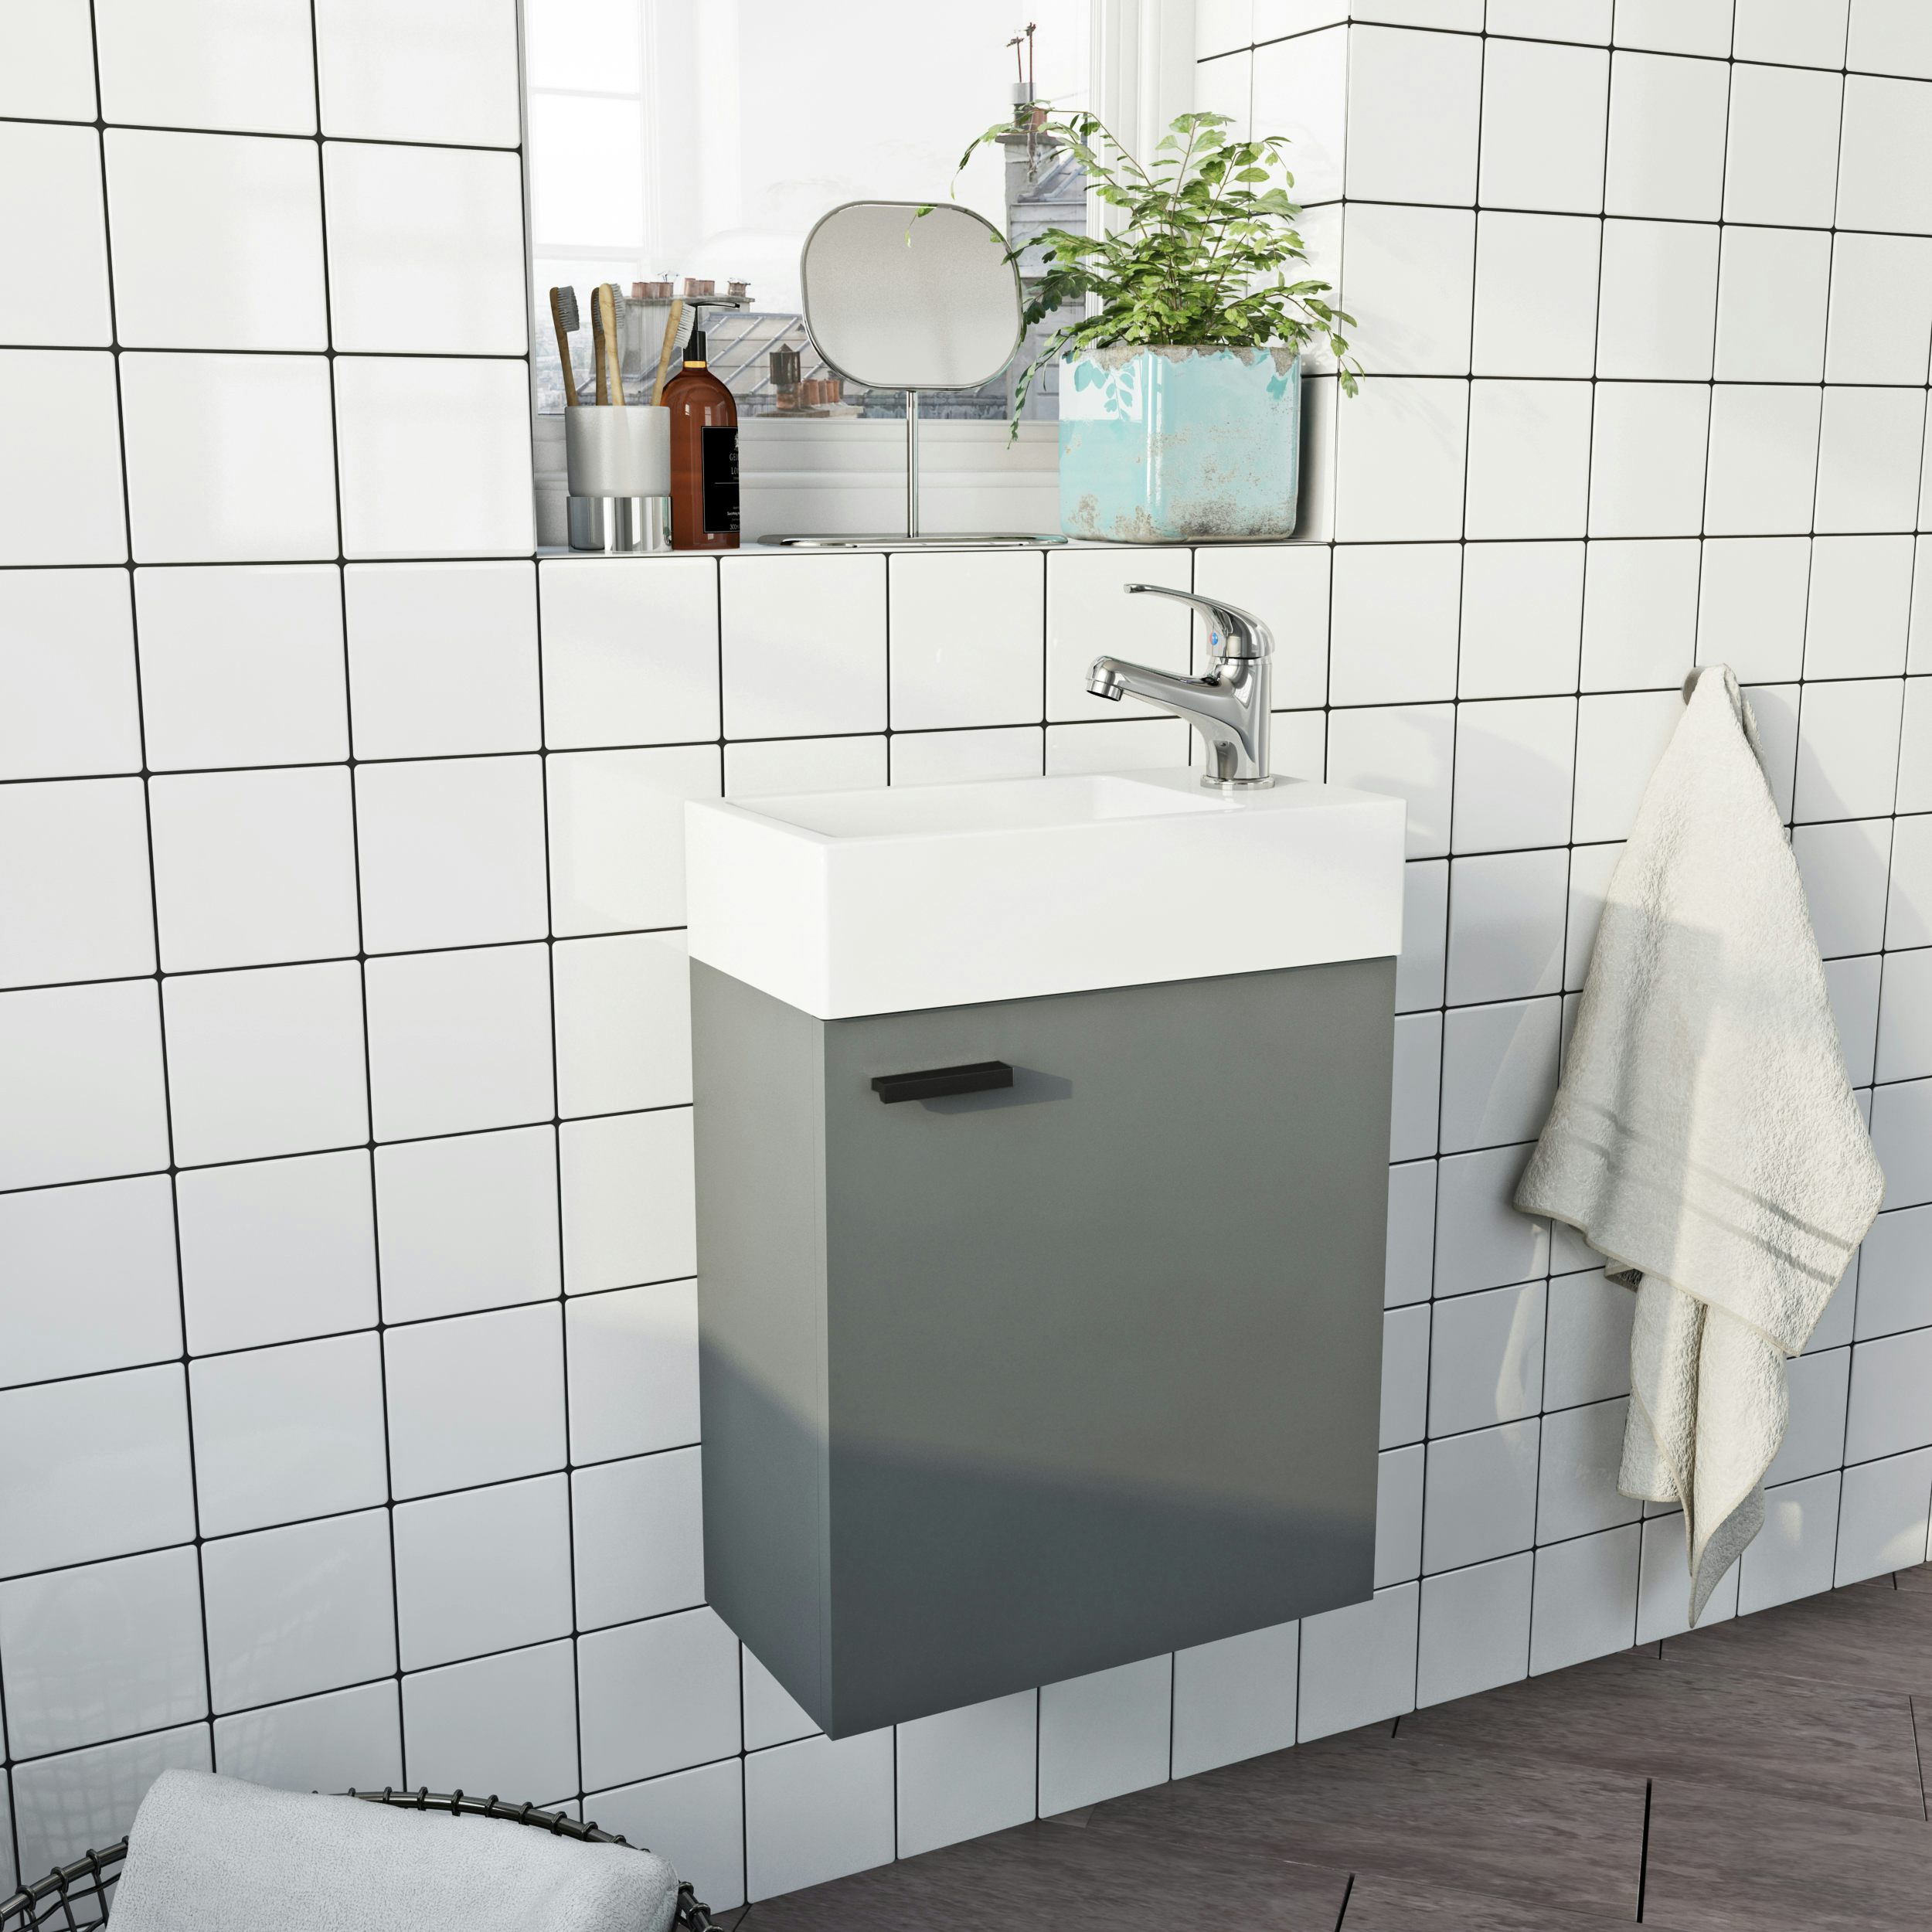 Clarity Compact satin grey wall hung cloakroom suite with contemporary close coupled toilet and black handles